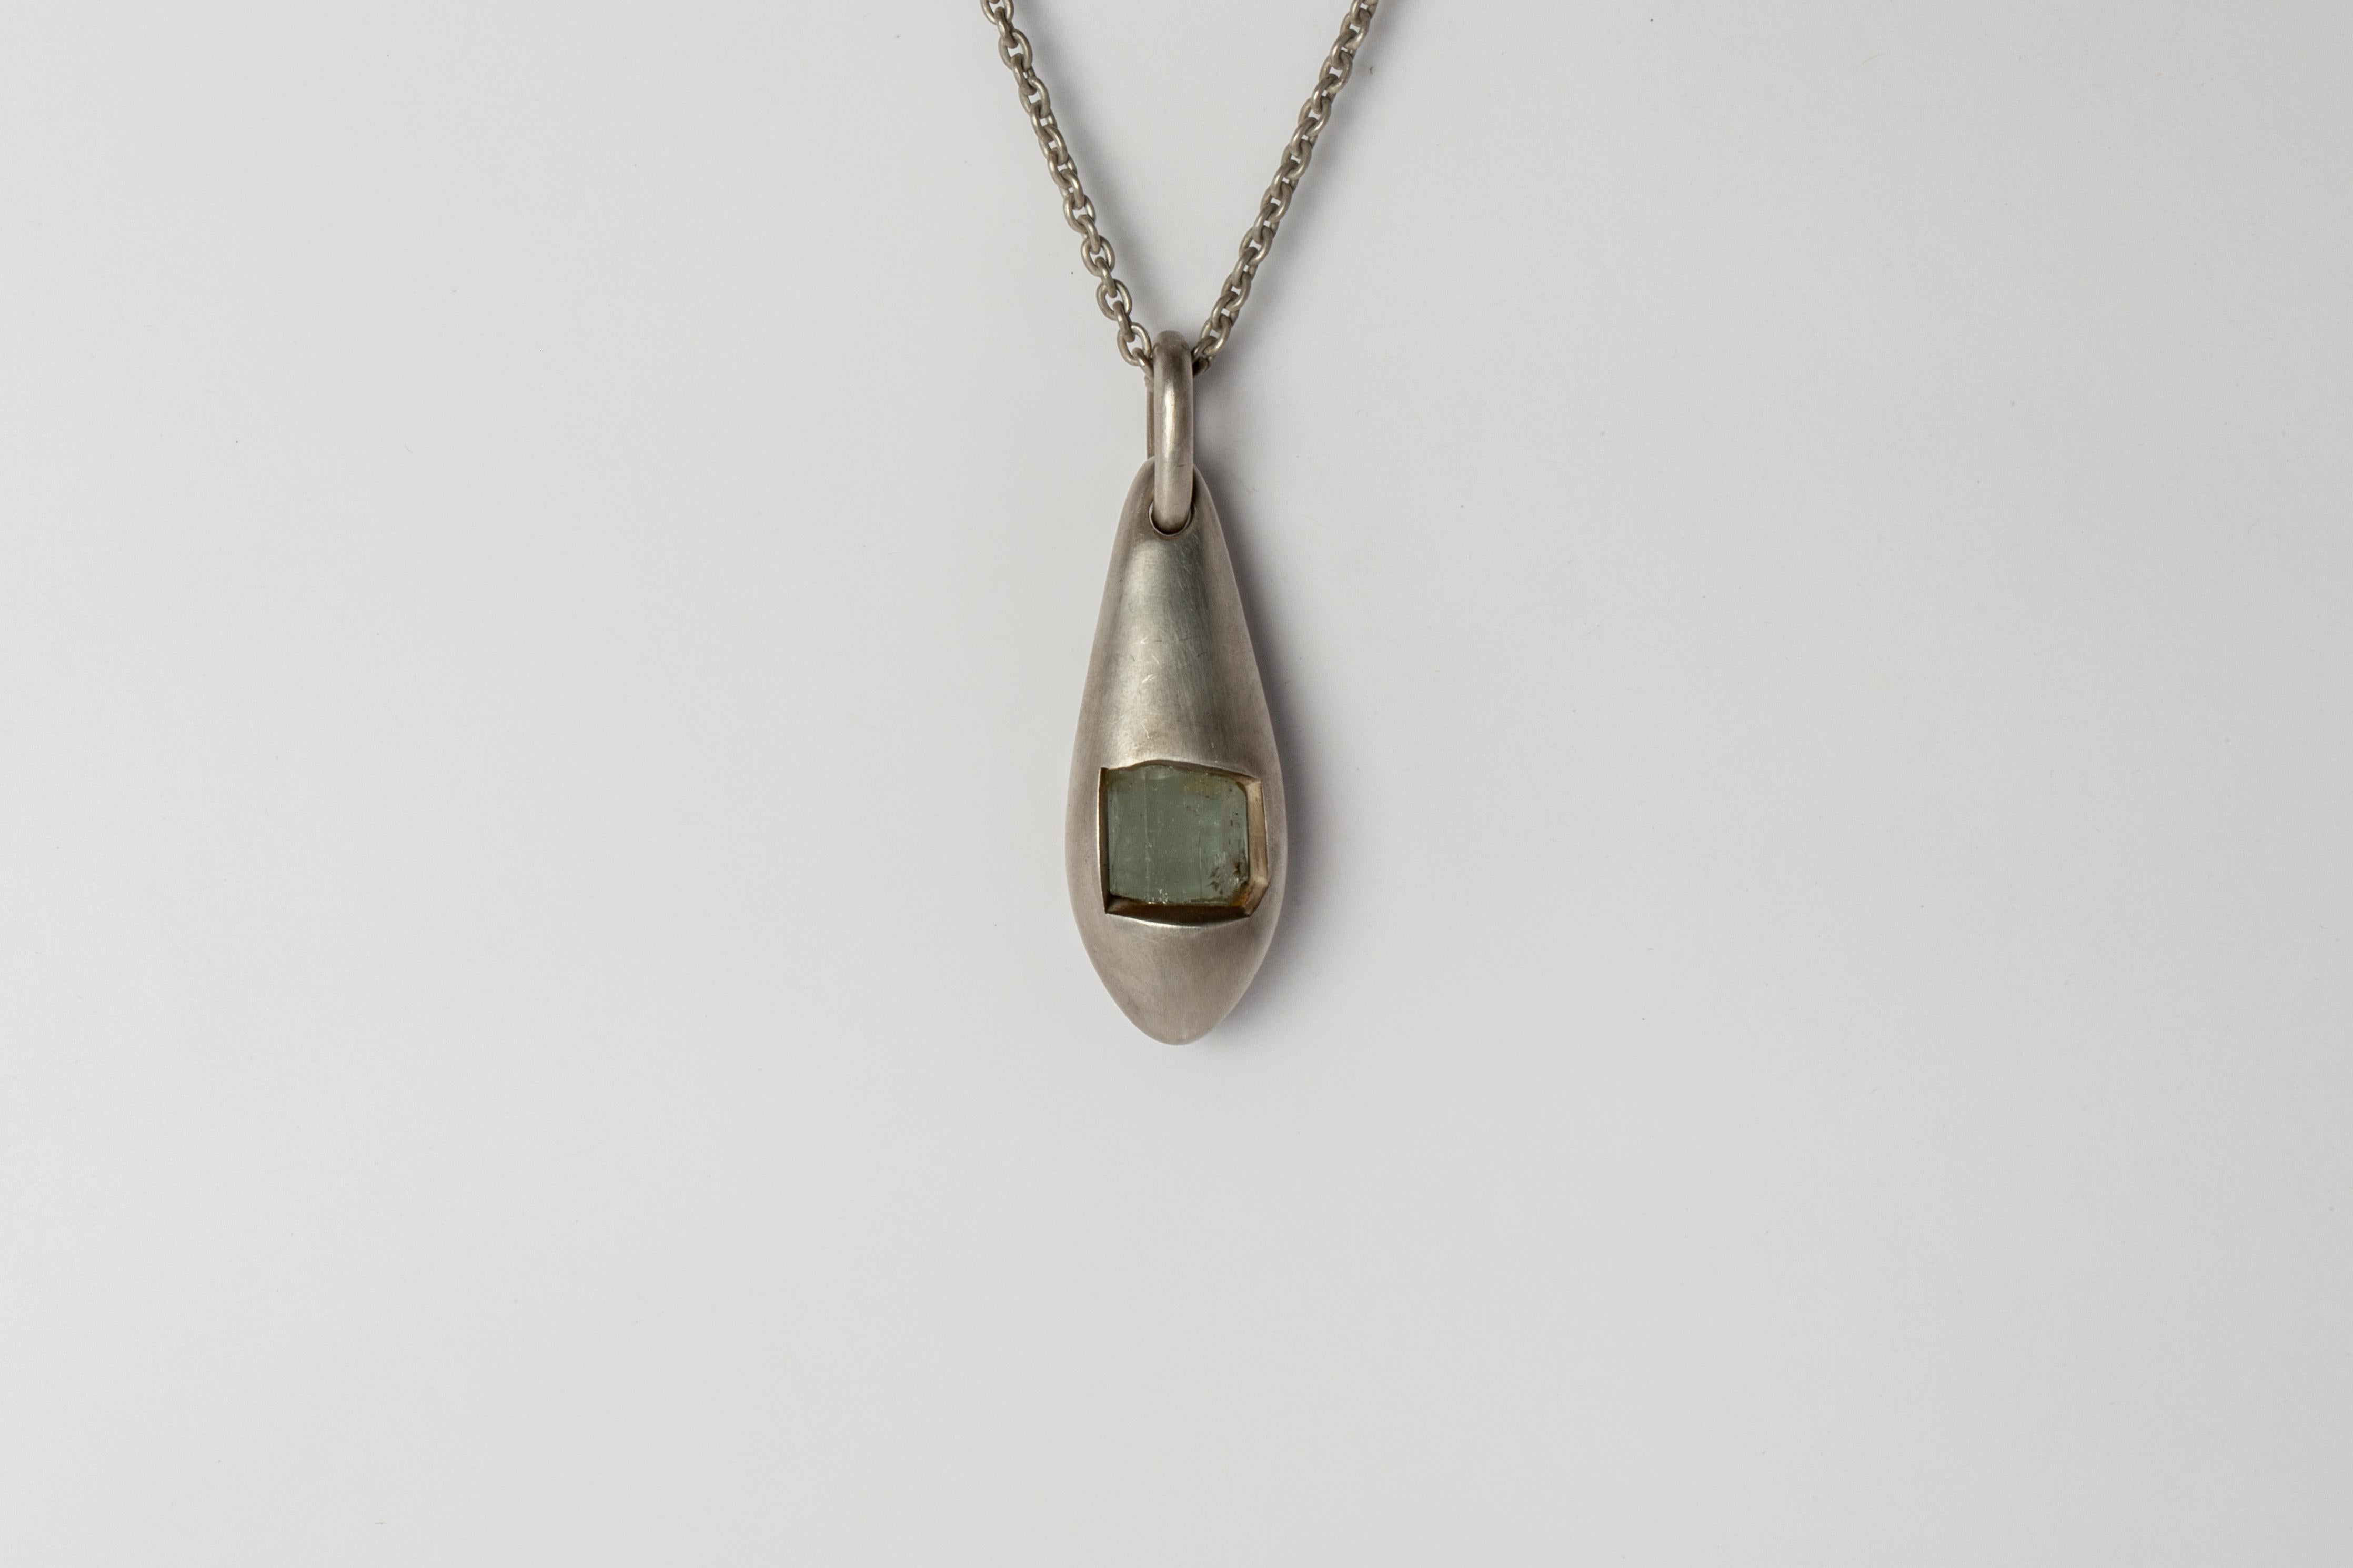 Pendant necklace in the shape of a chrysalis in sterling silver and a slab of rough aquamarine. It comes on a 74cm chain. Each piece is unique and this is what makes it special. 